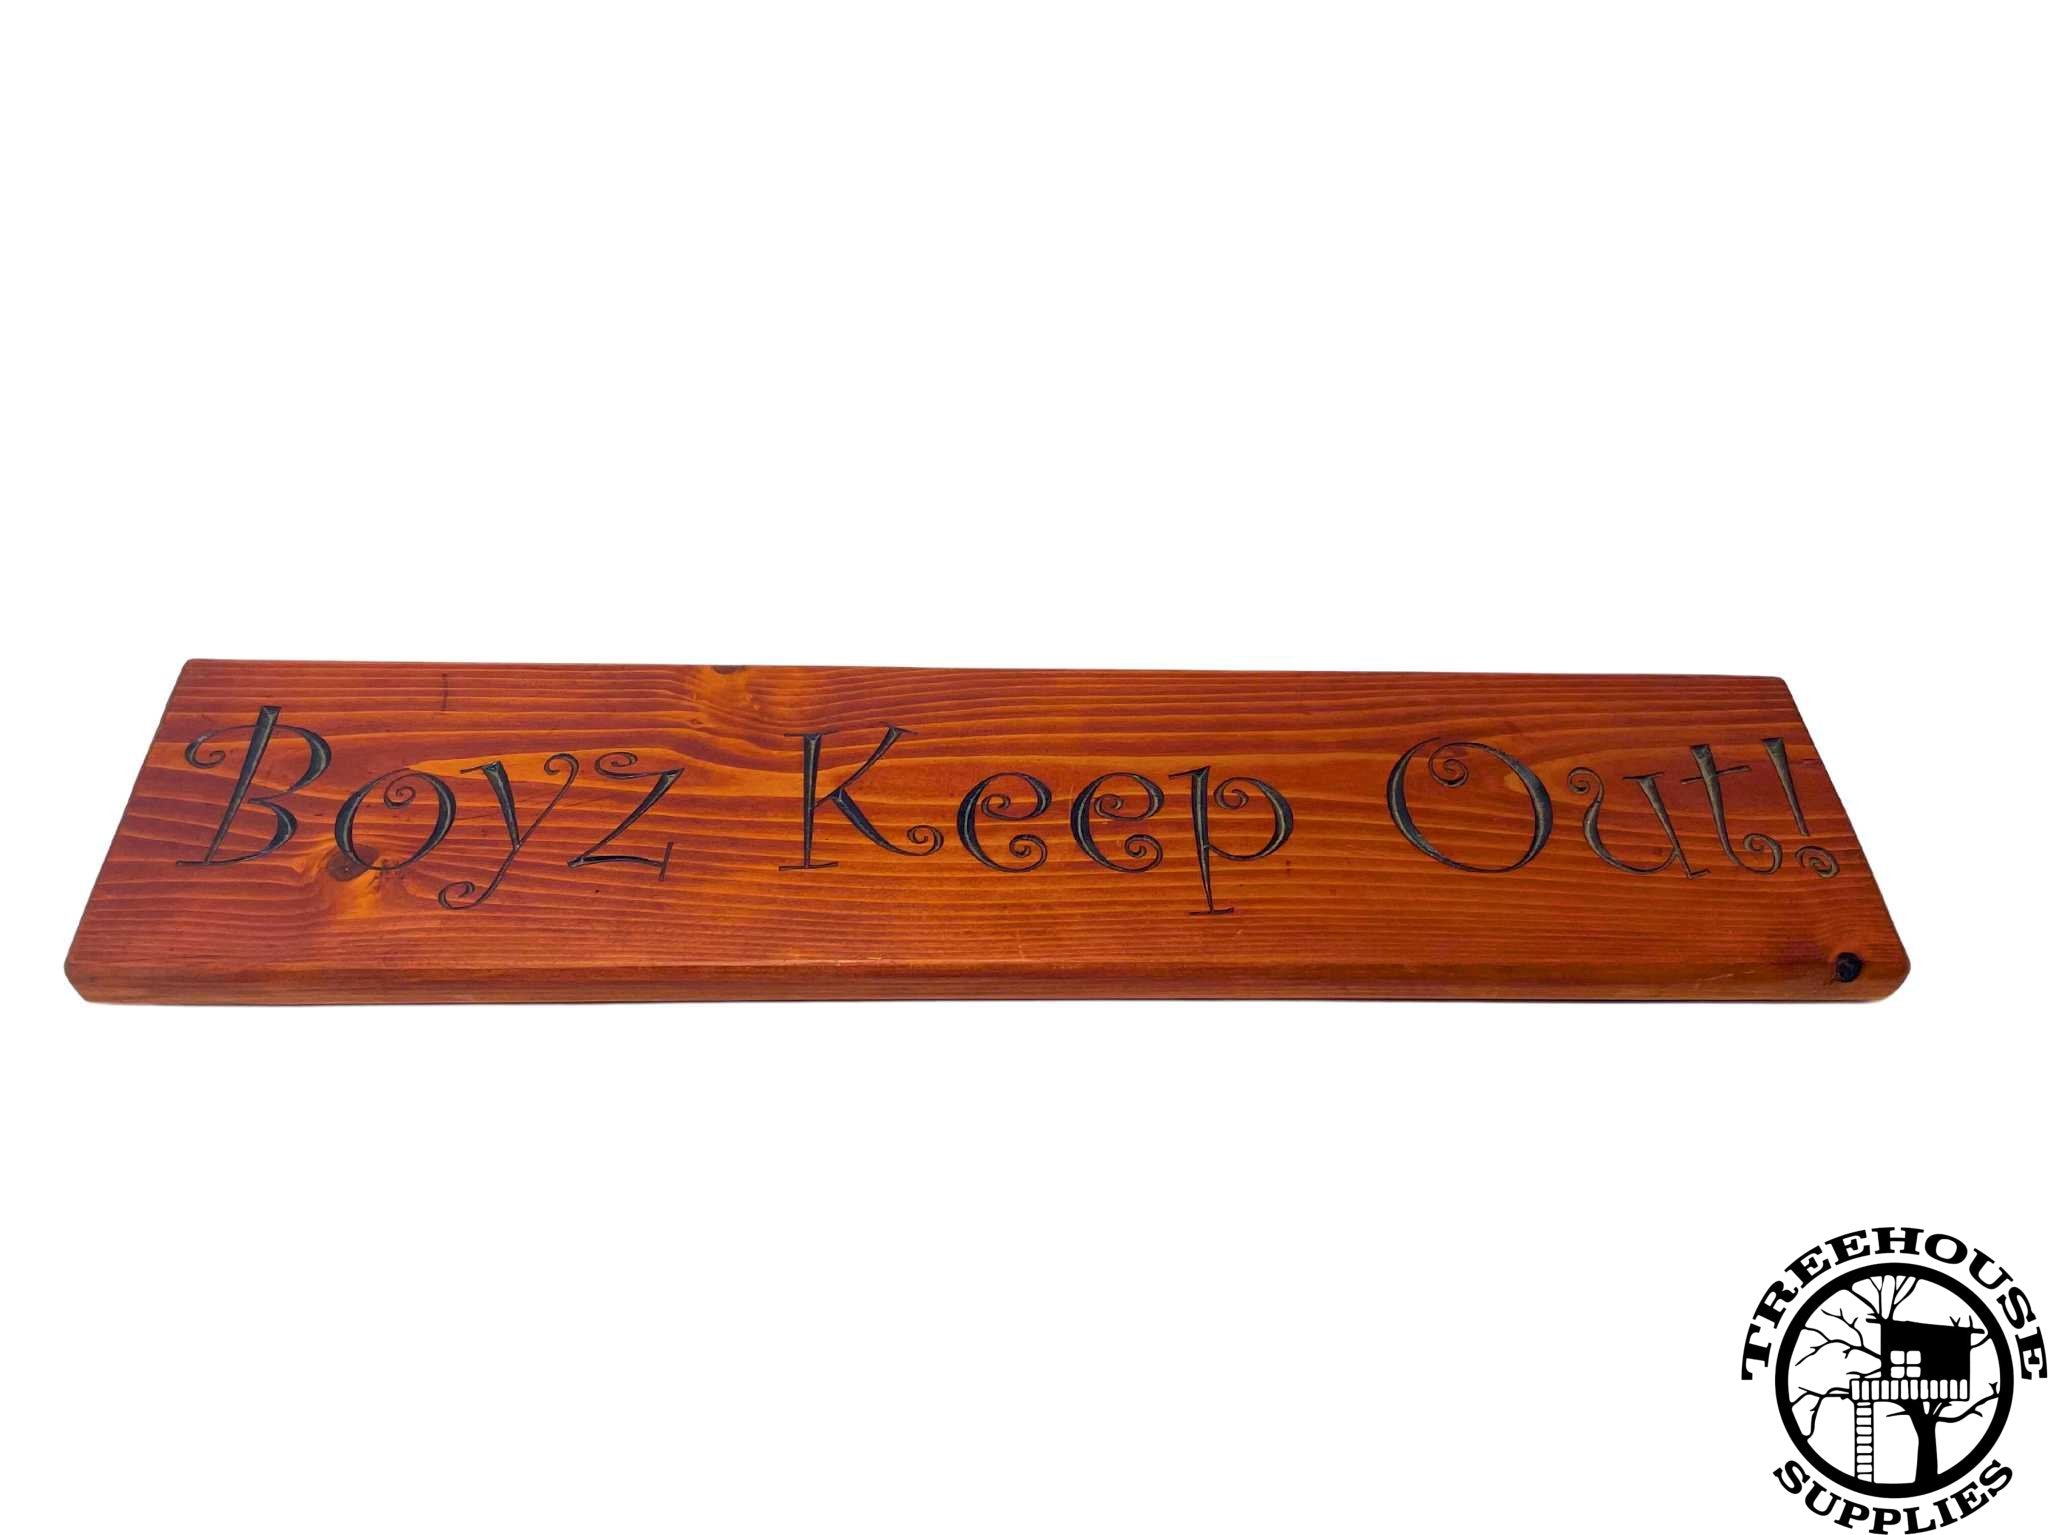 Two-foot long wooden sign with lettering with chestnut stain. engraved or carved text states Boyz Keep Out. Side view